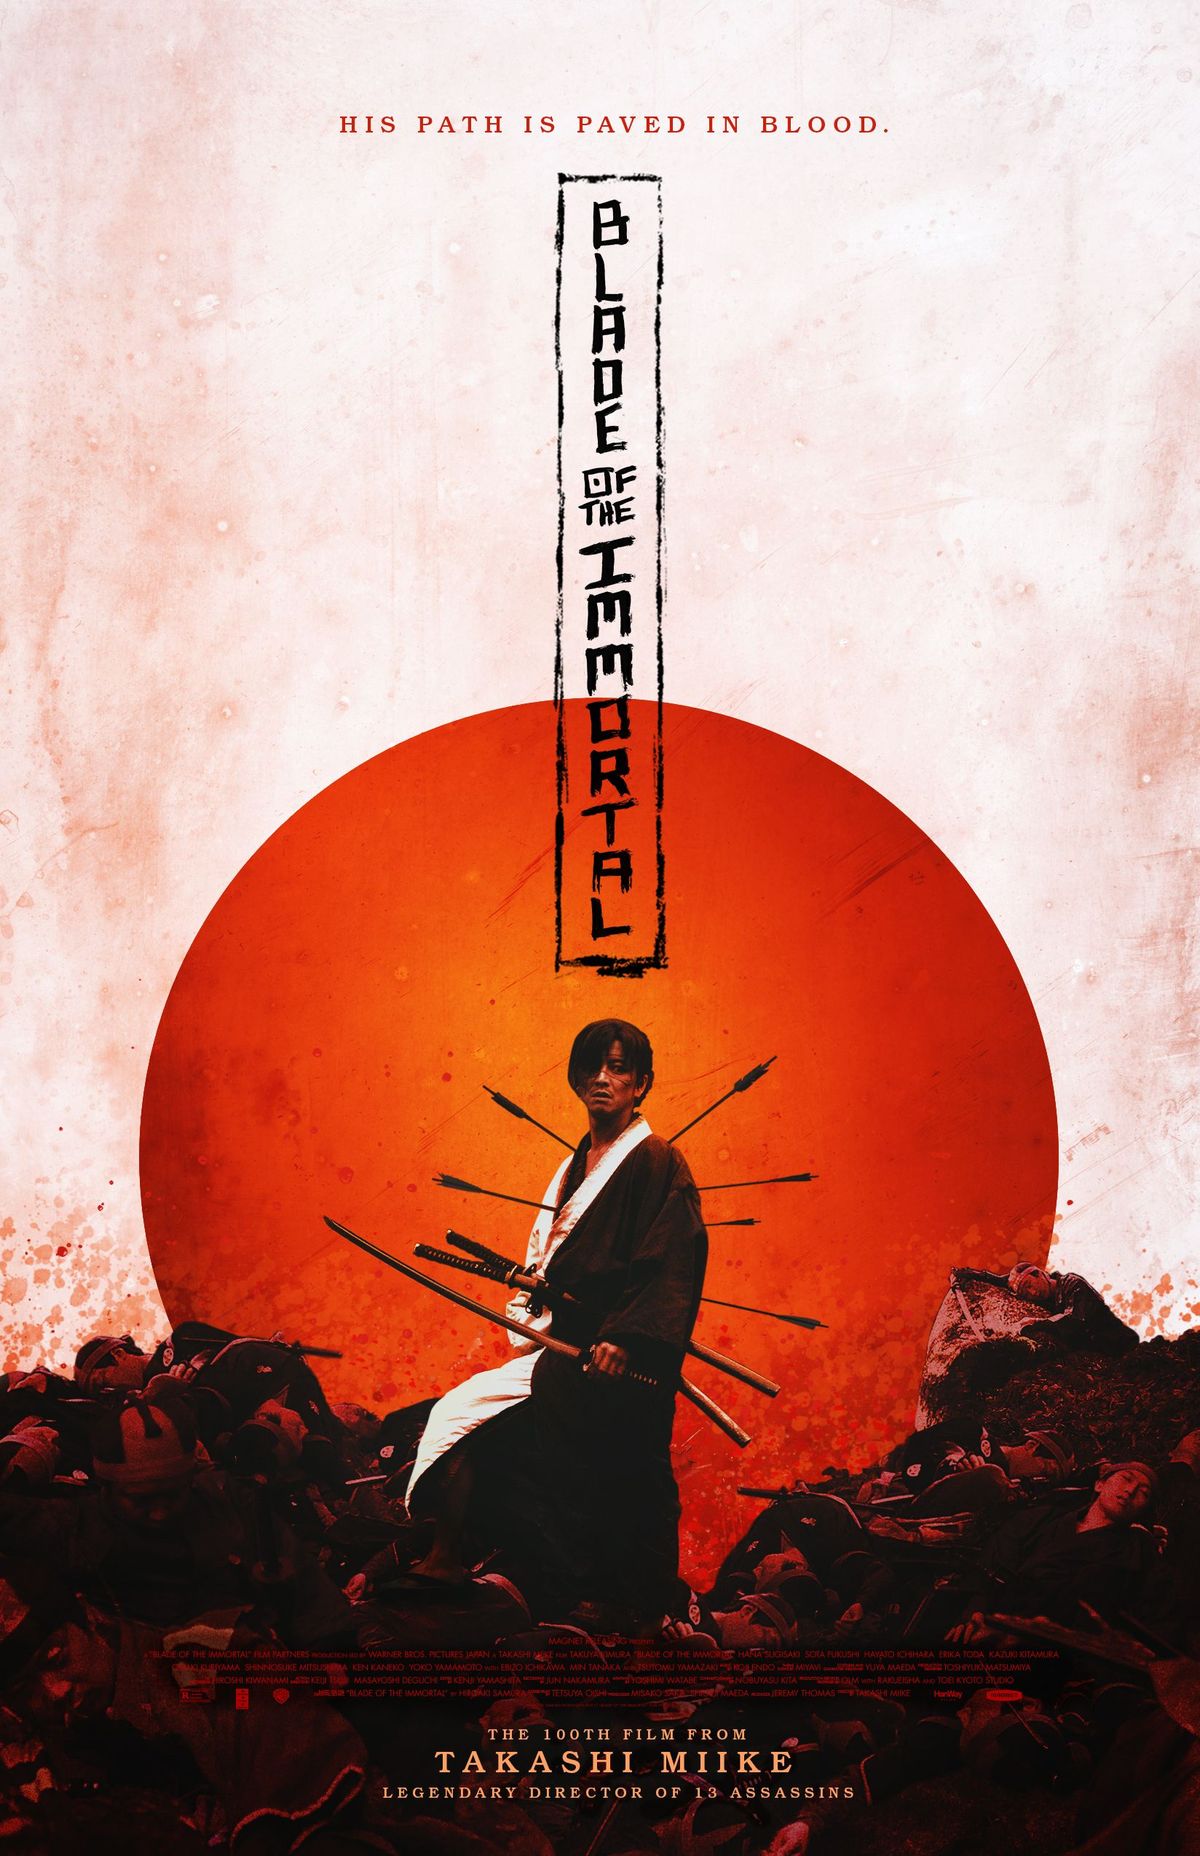 EXCLUSIVO: Blade of the Immortal Alternate Movie Poster